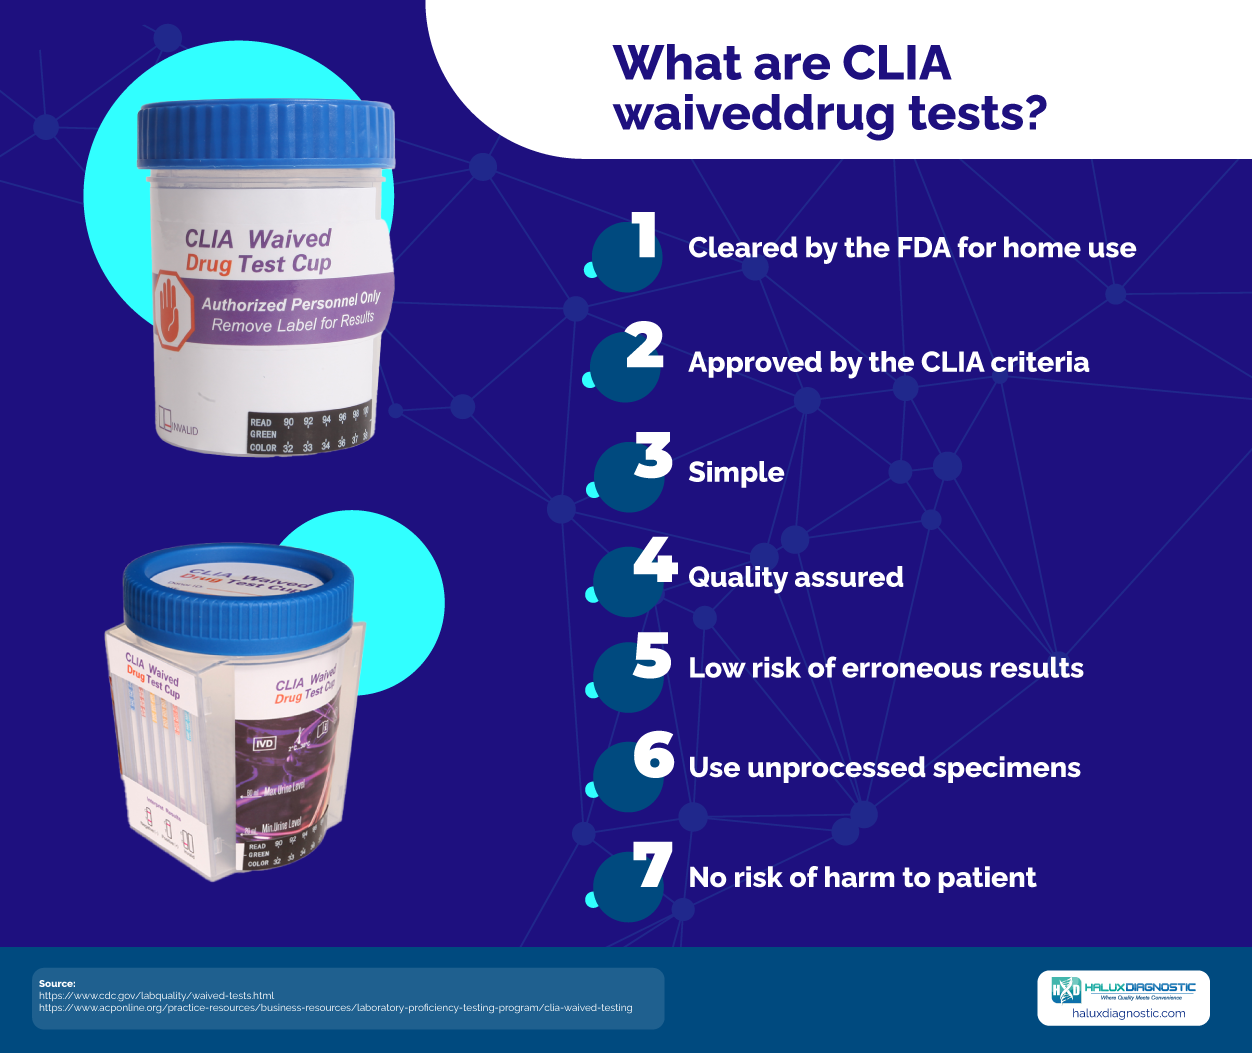 clia waived drug test cups